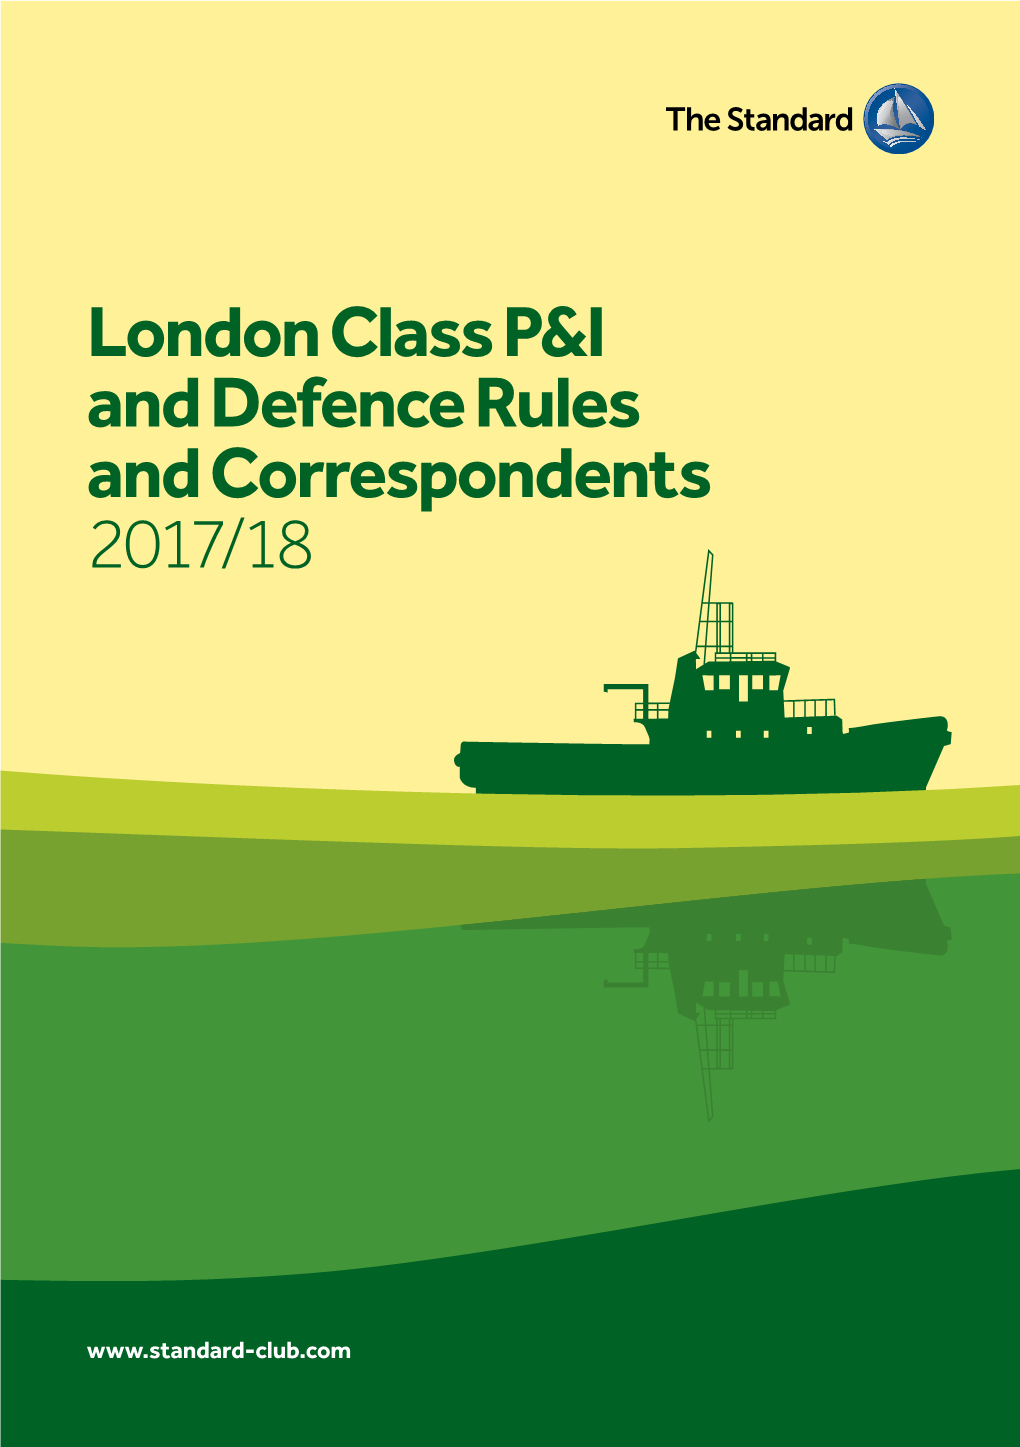 London Class P&I and Defence Rules and Correspondents 2017/18